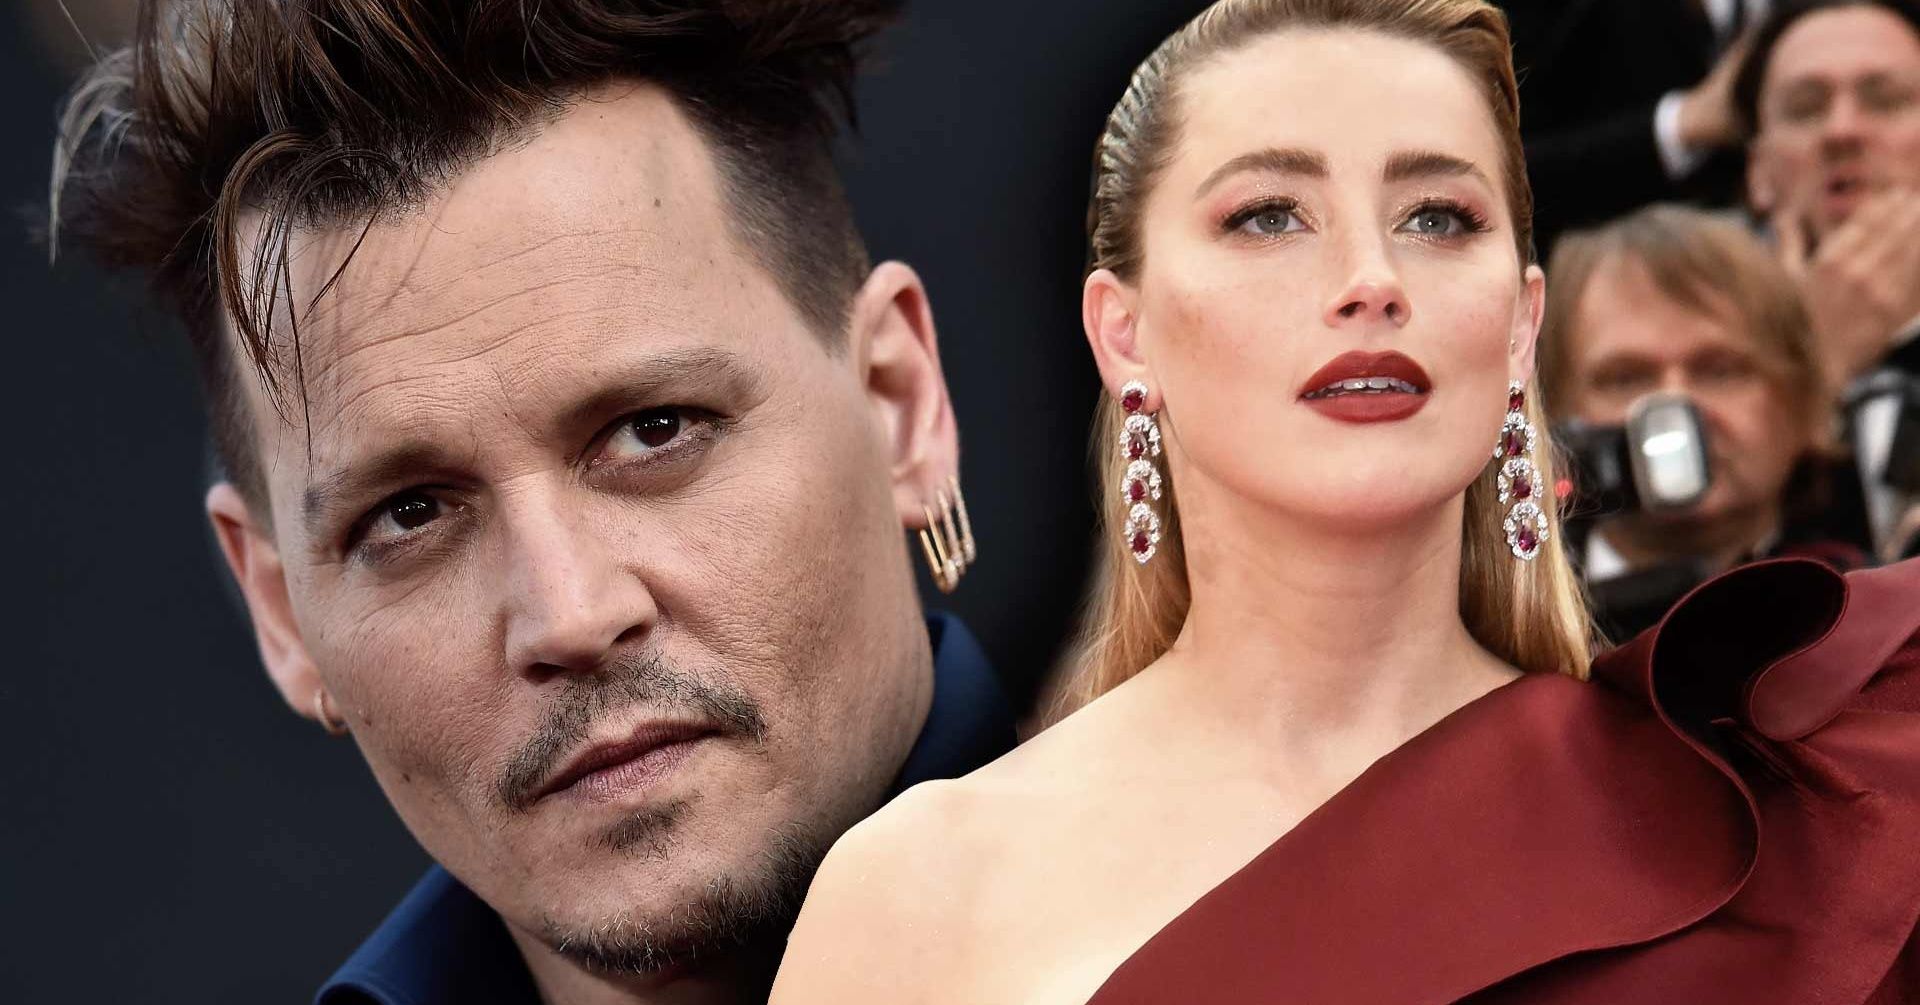 Johnny Depp And Amber Heard Going To Trial In Defamation Case